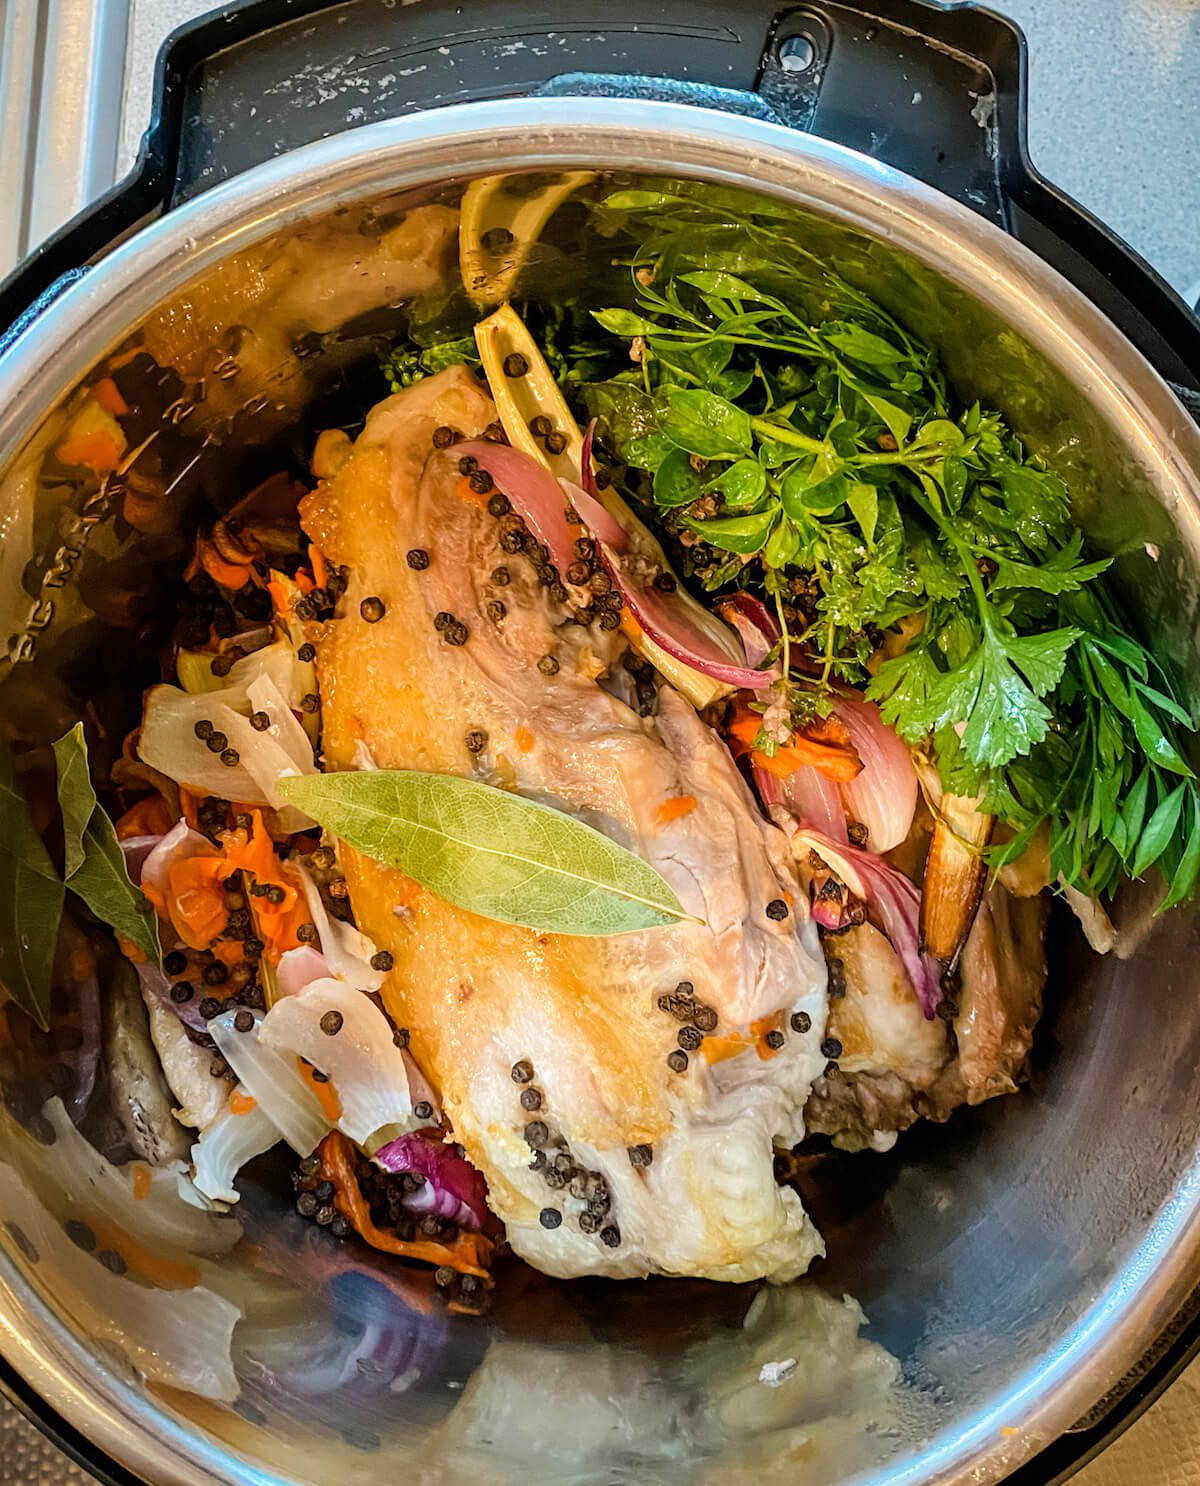 turkey leftovers with herbs for broth